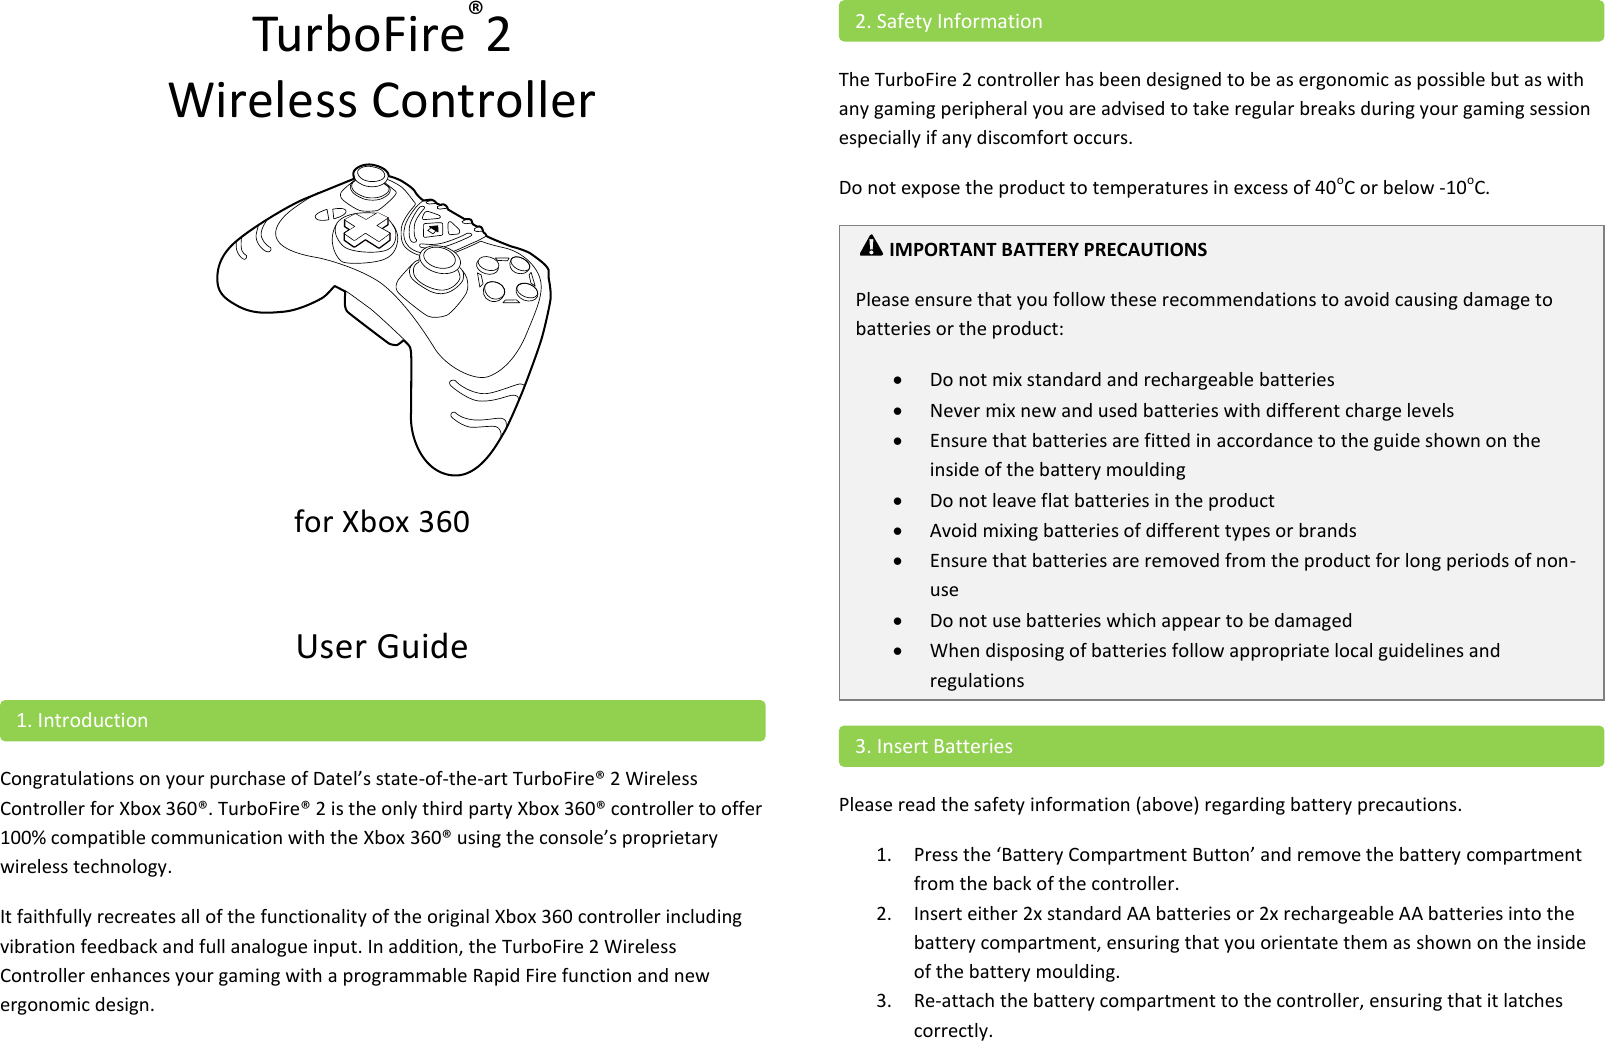 TurboFire®2  Wireless Controller   for Xbox 360  User Guide  Congratulations on your purchase of Datel’s state-of-the-art TurboFire® 2 Wireless Controller for Xbox 360®. TurboFire® 2 is the only third party Xbox 360® controller to offer 100% compatible communication with the Xbox 360® using the console’s proprietary wireless technology. It faithfully recreates all of the functionality of the original Xbox 360 controller including vibration feedback and full analogue input. In addition, the TurboFire 2 Wireless Controller enhances your gaming with a programmable Rapid Fire function and new ergonomic design.   The TurboFire 2 controller has been designed to be as ergonomic as possible but as with any gaming peripheral you are advised to take regular breaks during your gaming session especially if any discomfort occurs. Do not expose the product to temperatures in excess of 40oC or below -10oC.   Please read the safety information (above) regarding battery precautions. 1. Press the ‘Battery Compartment Button’ and remove the battery compartment from the back of the controller. 2. Insert either 2x standard AA batteries or 2x rechargeable AA batteries into the battery compartment, ensuring that you orientate them as shown on the inside of the battery moulding. 3. Re-attach the battery compartment to the controller, ensuring that it latches correctly.  3. Insert Batteries  IMPORTANT BATTERY PRECAUTIONS Please ensure that you follow these recommendations to avoid causing damage to batteries or the product:  Do not mix standard and rechargeable batteries  Never mix new and used batteries with different charge levels  Ensure that batteries are fitted in accordance to the guide shown on the inside of the battery moulding  Do not leave flat batteries in the product  Avoid mixing batteries of different types or brands  Ensure that batteries are removed from the product for long periods of non-use  Do not use batteries which appear to be damaged  When disposing of batteries follow appropriate local guidelines and regulations   2. Safety Information 1. Introduction 